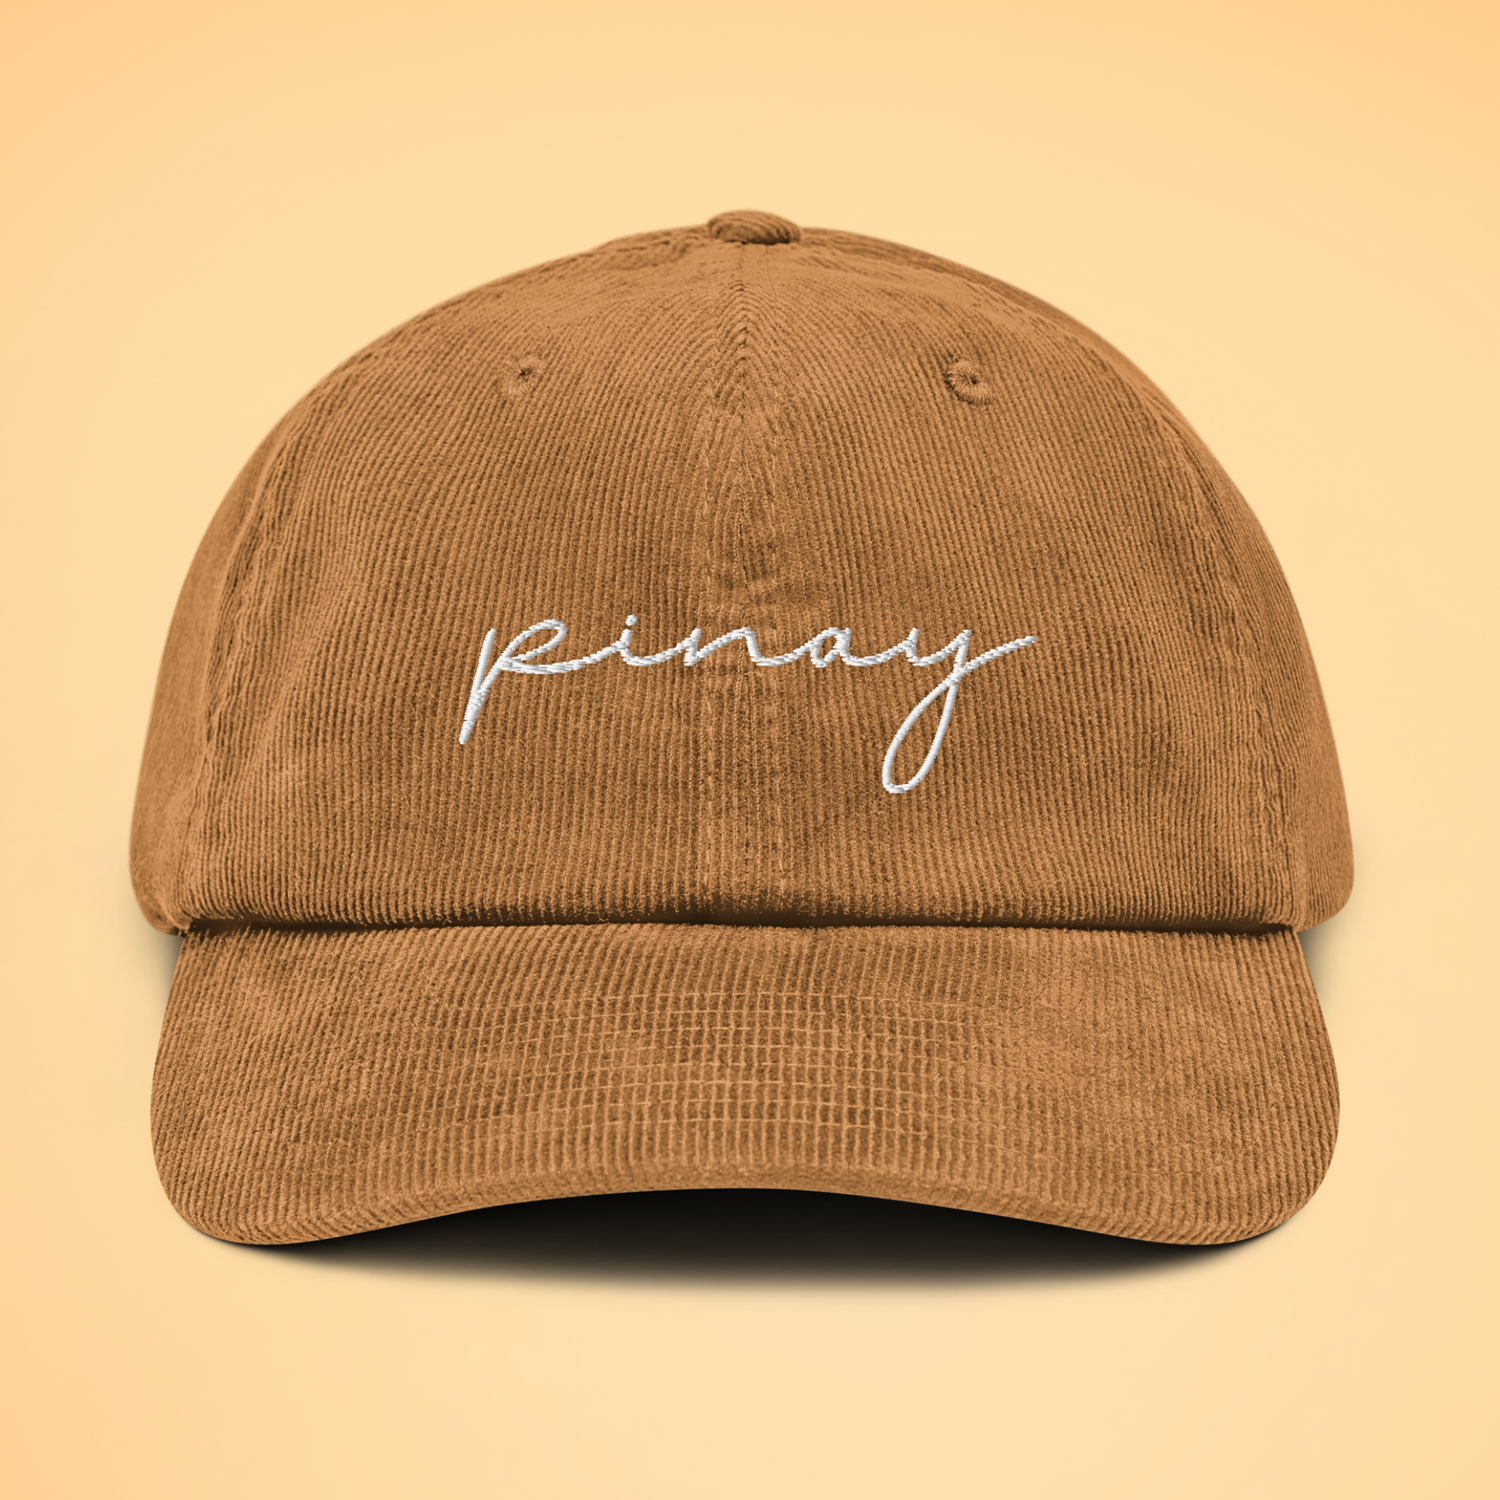 Filipino Pinay Embroidered Cotton Corduroy Cap in Camel